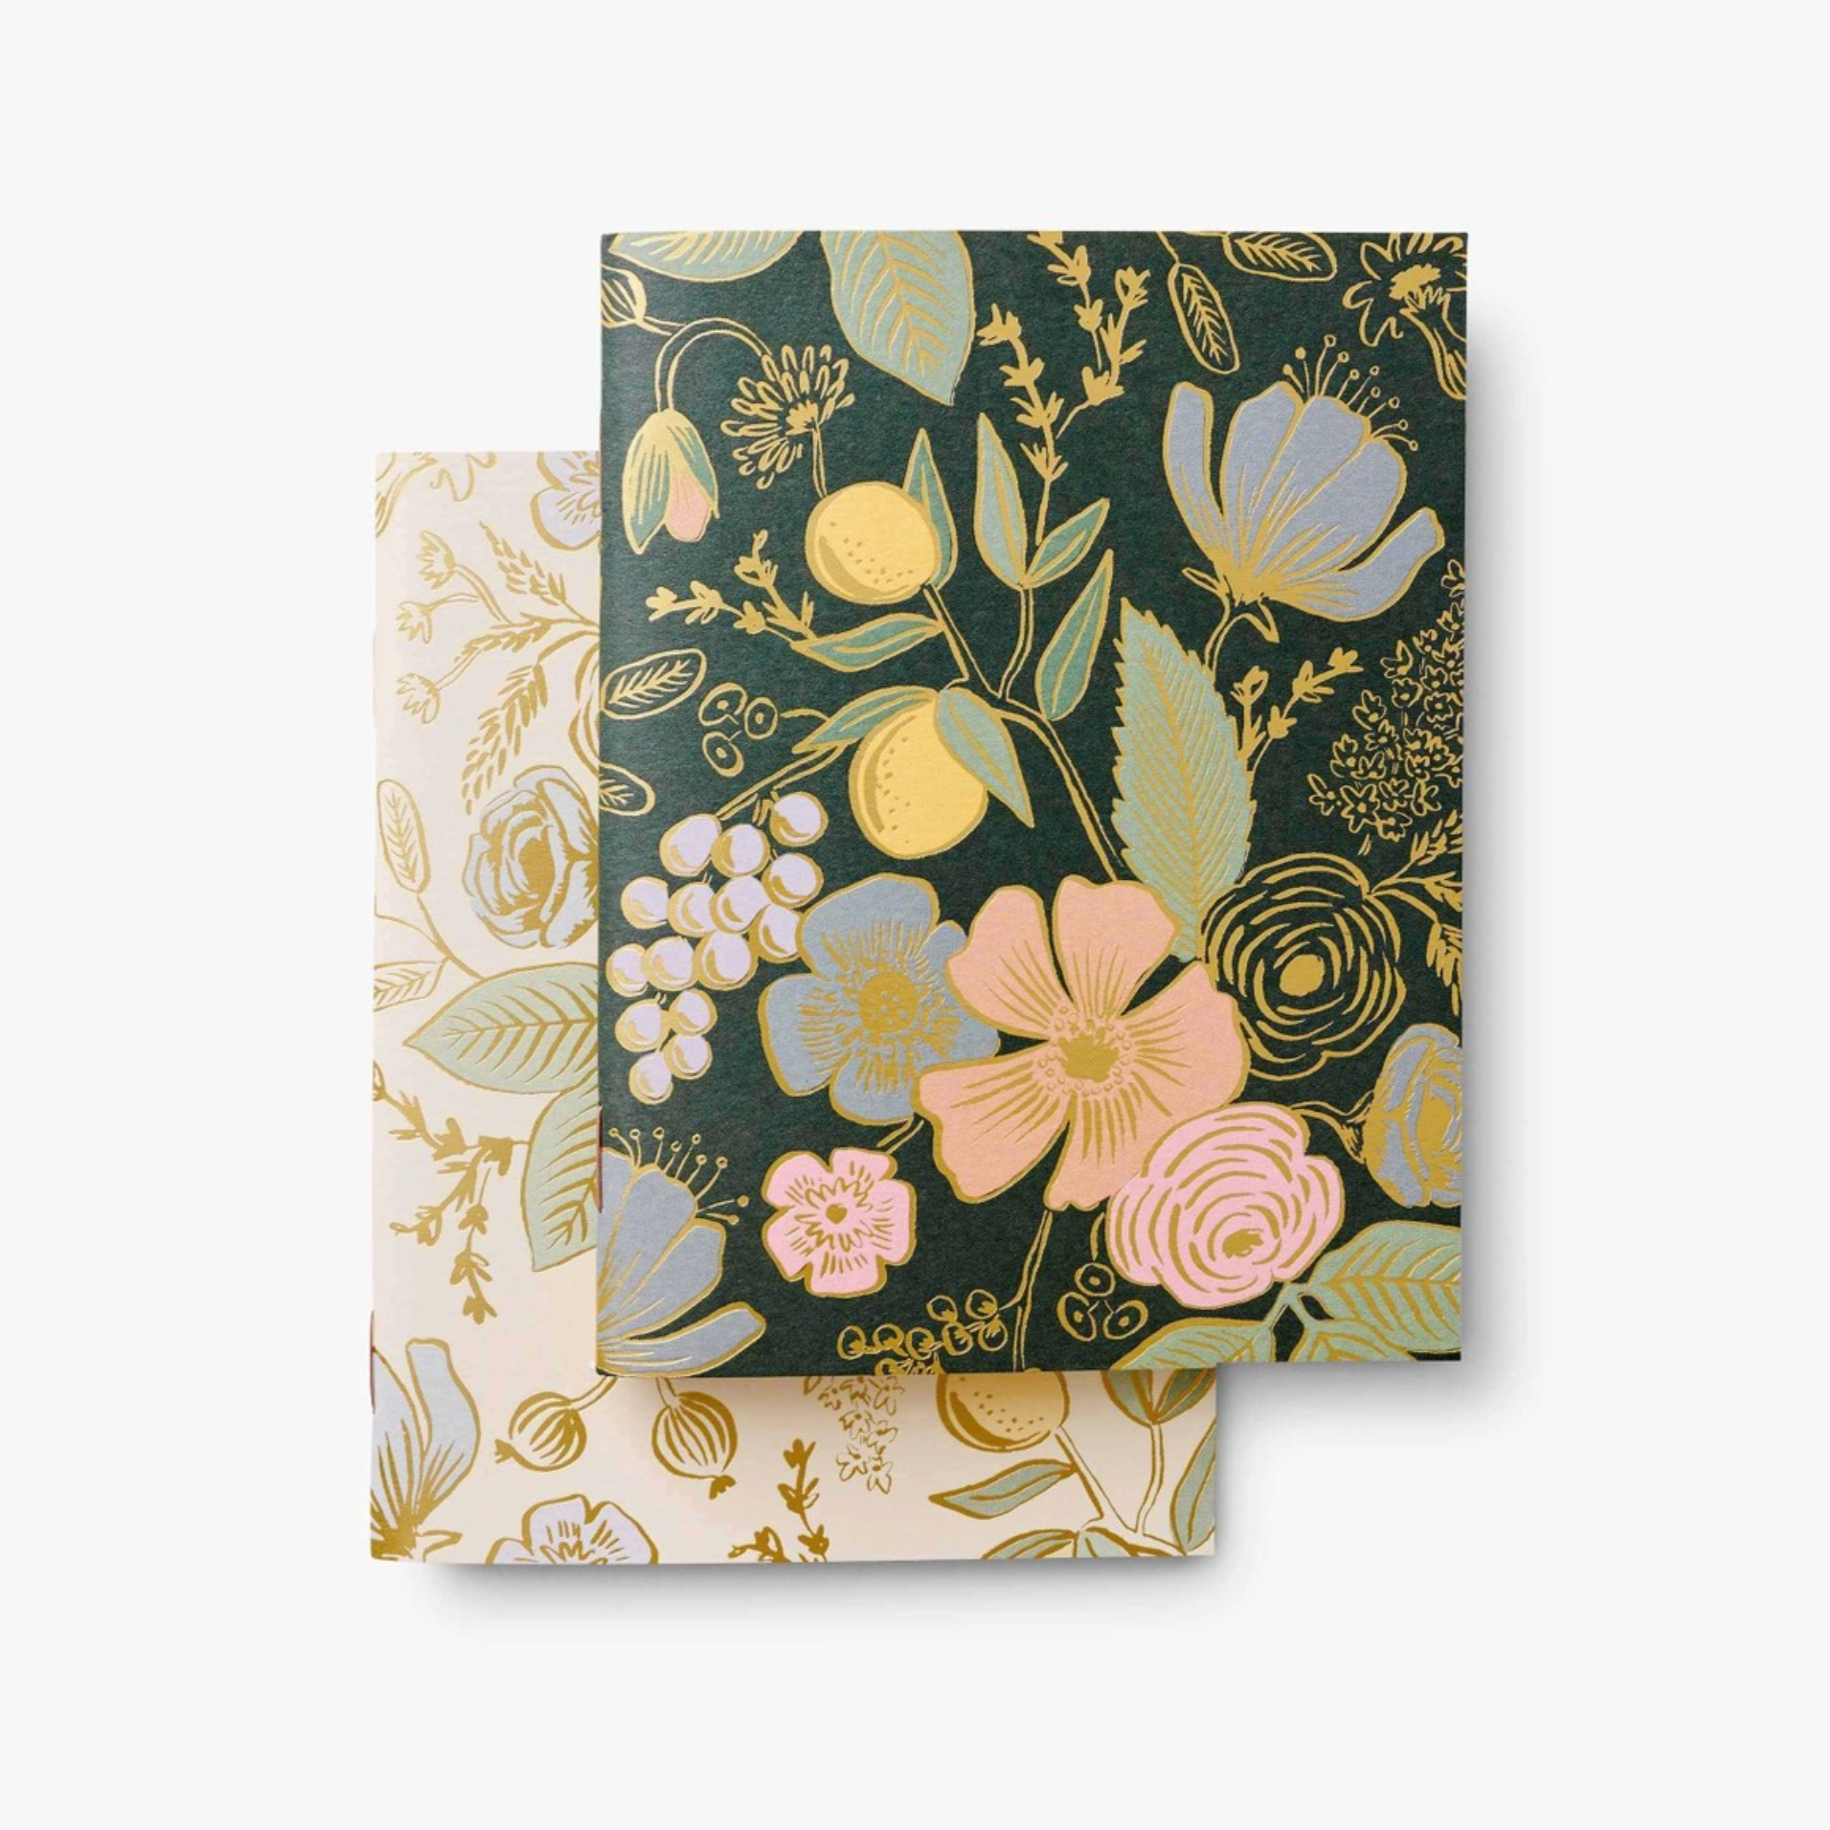 colette pocket notebooks (2) on a white surface. one dark toned notebook with flowers and one light toned notebook with flower pattern.